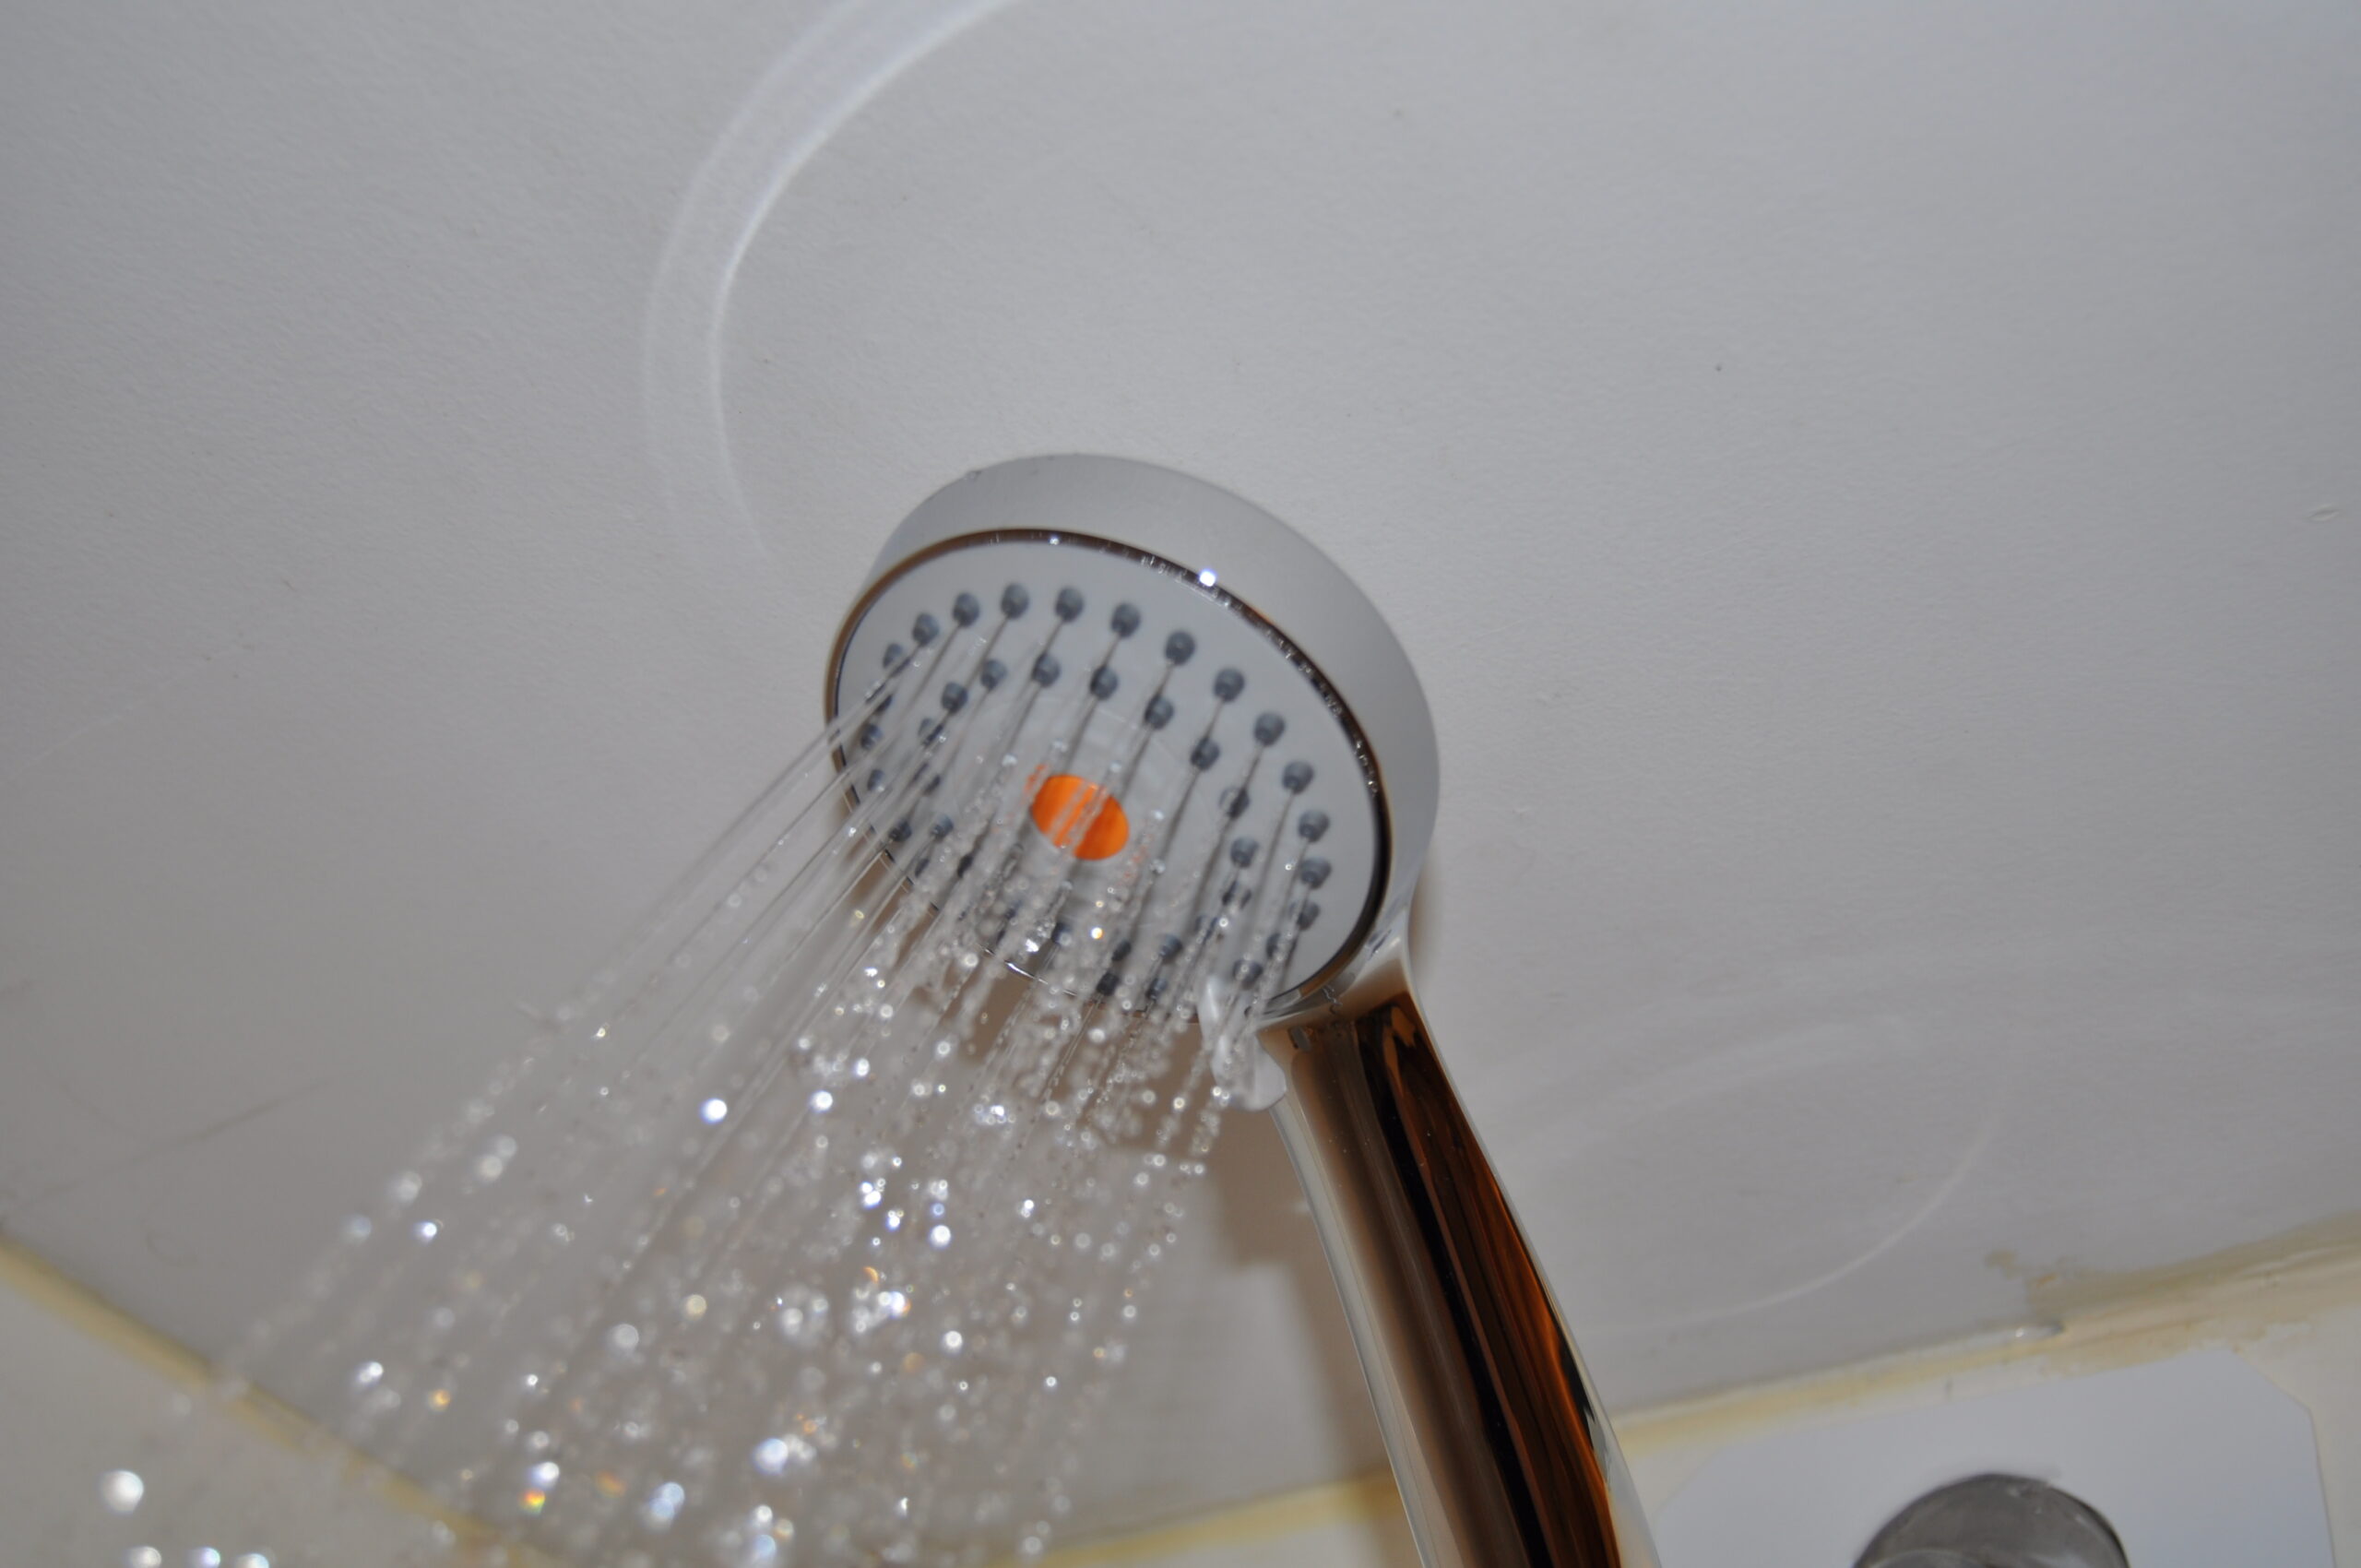 TheHO2ME High-Pressure Handheld Shower Head in use during testing.